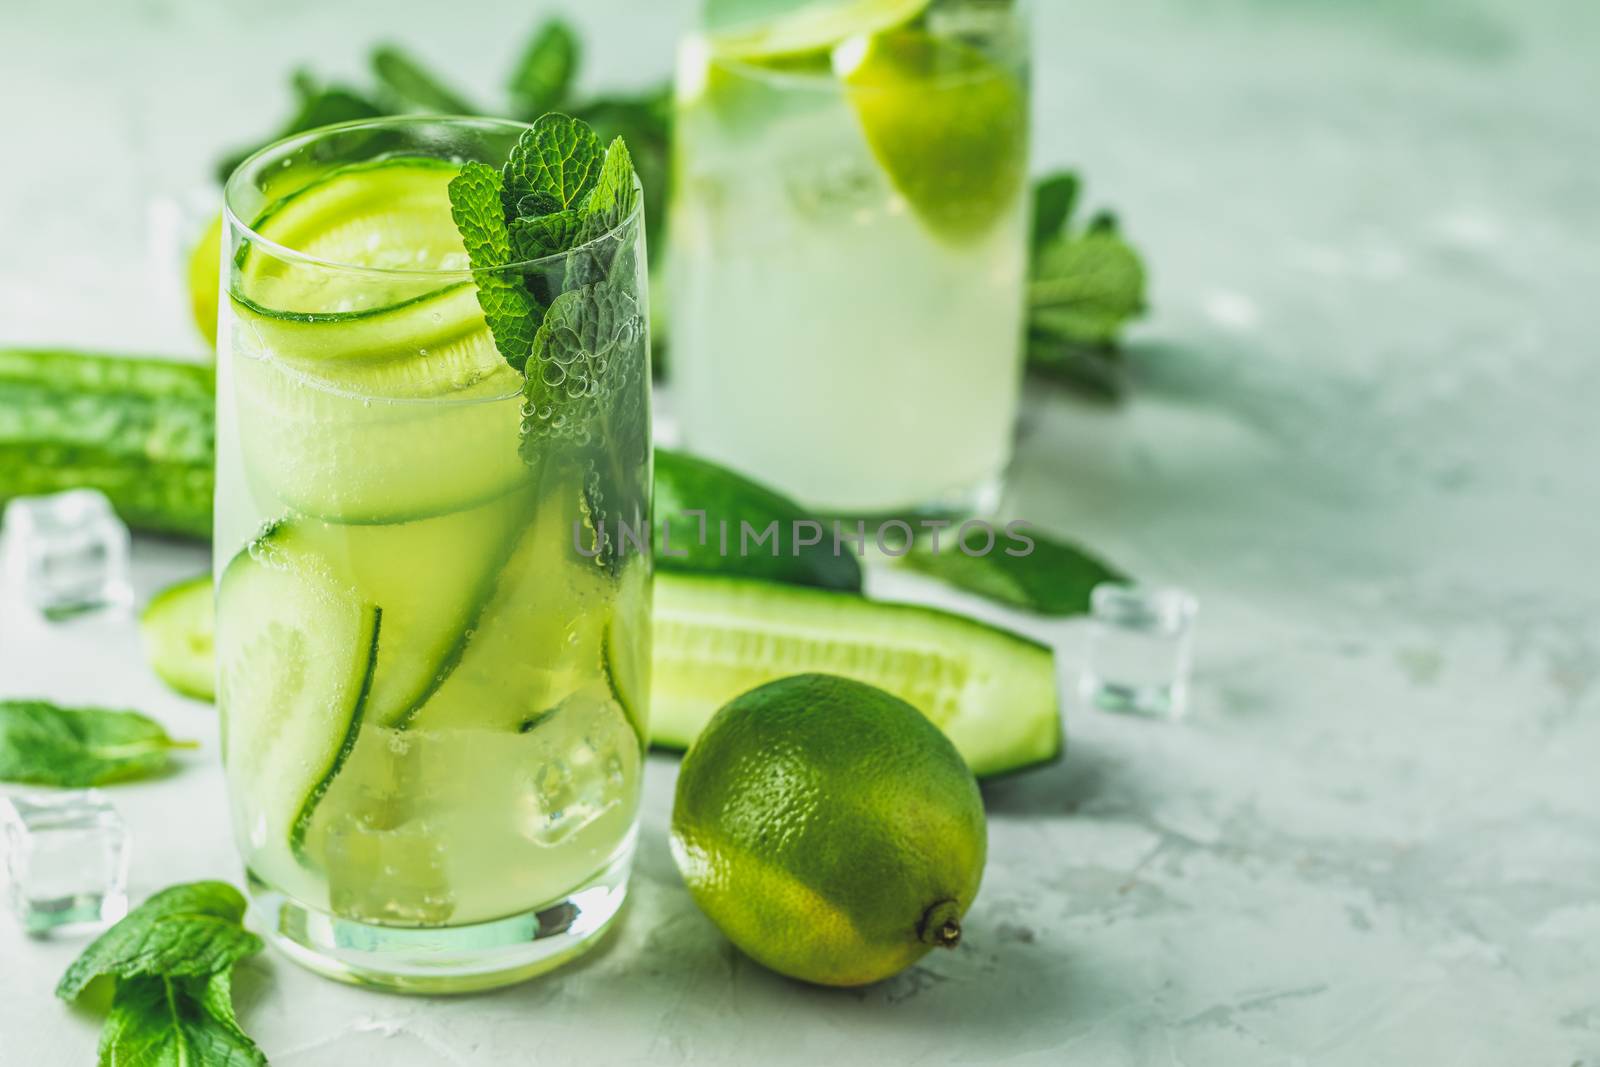 Detox cocktail of mint, cucumber and lemon and mojito cocktail  by ArtSvitlyna